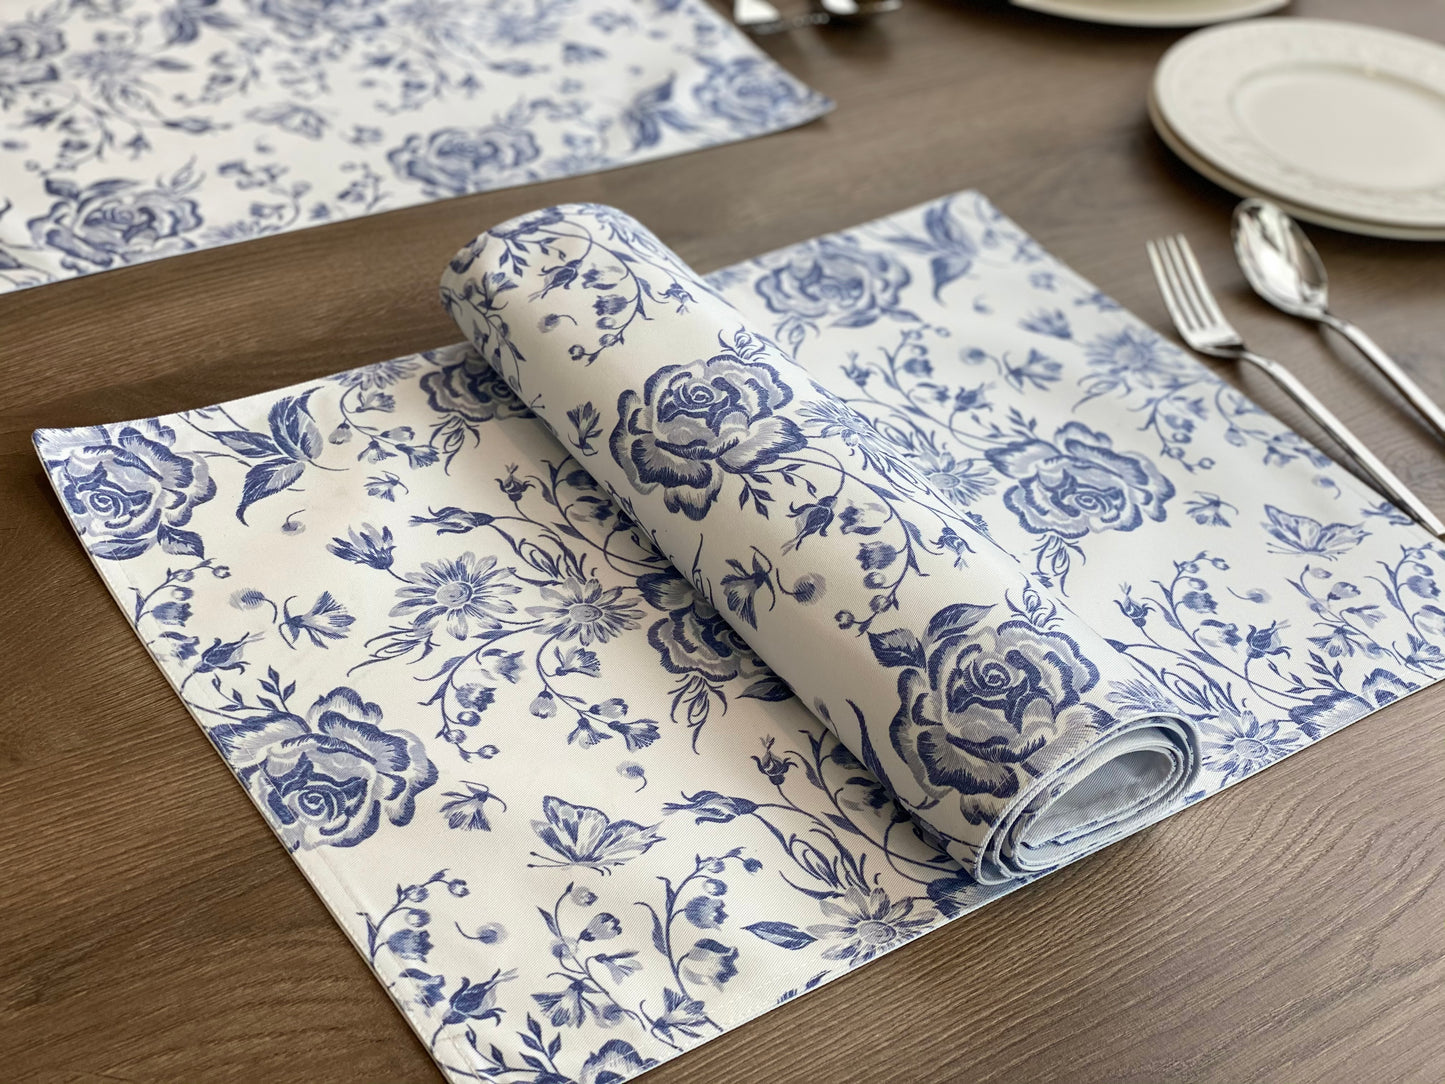 Set of 4 Rose Garden Placemat, blue roses, and chamomiles floral Printed placemat. 14" x 19". Washable Cotton Placemat for fall dining table